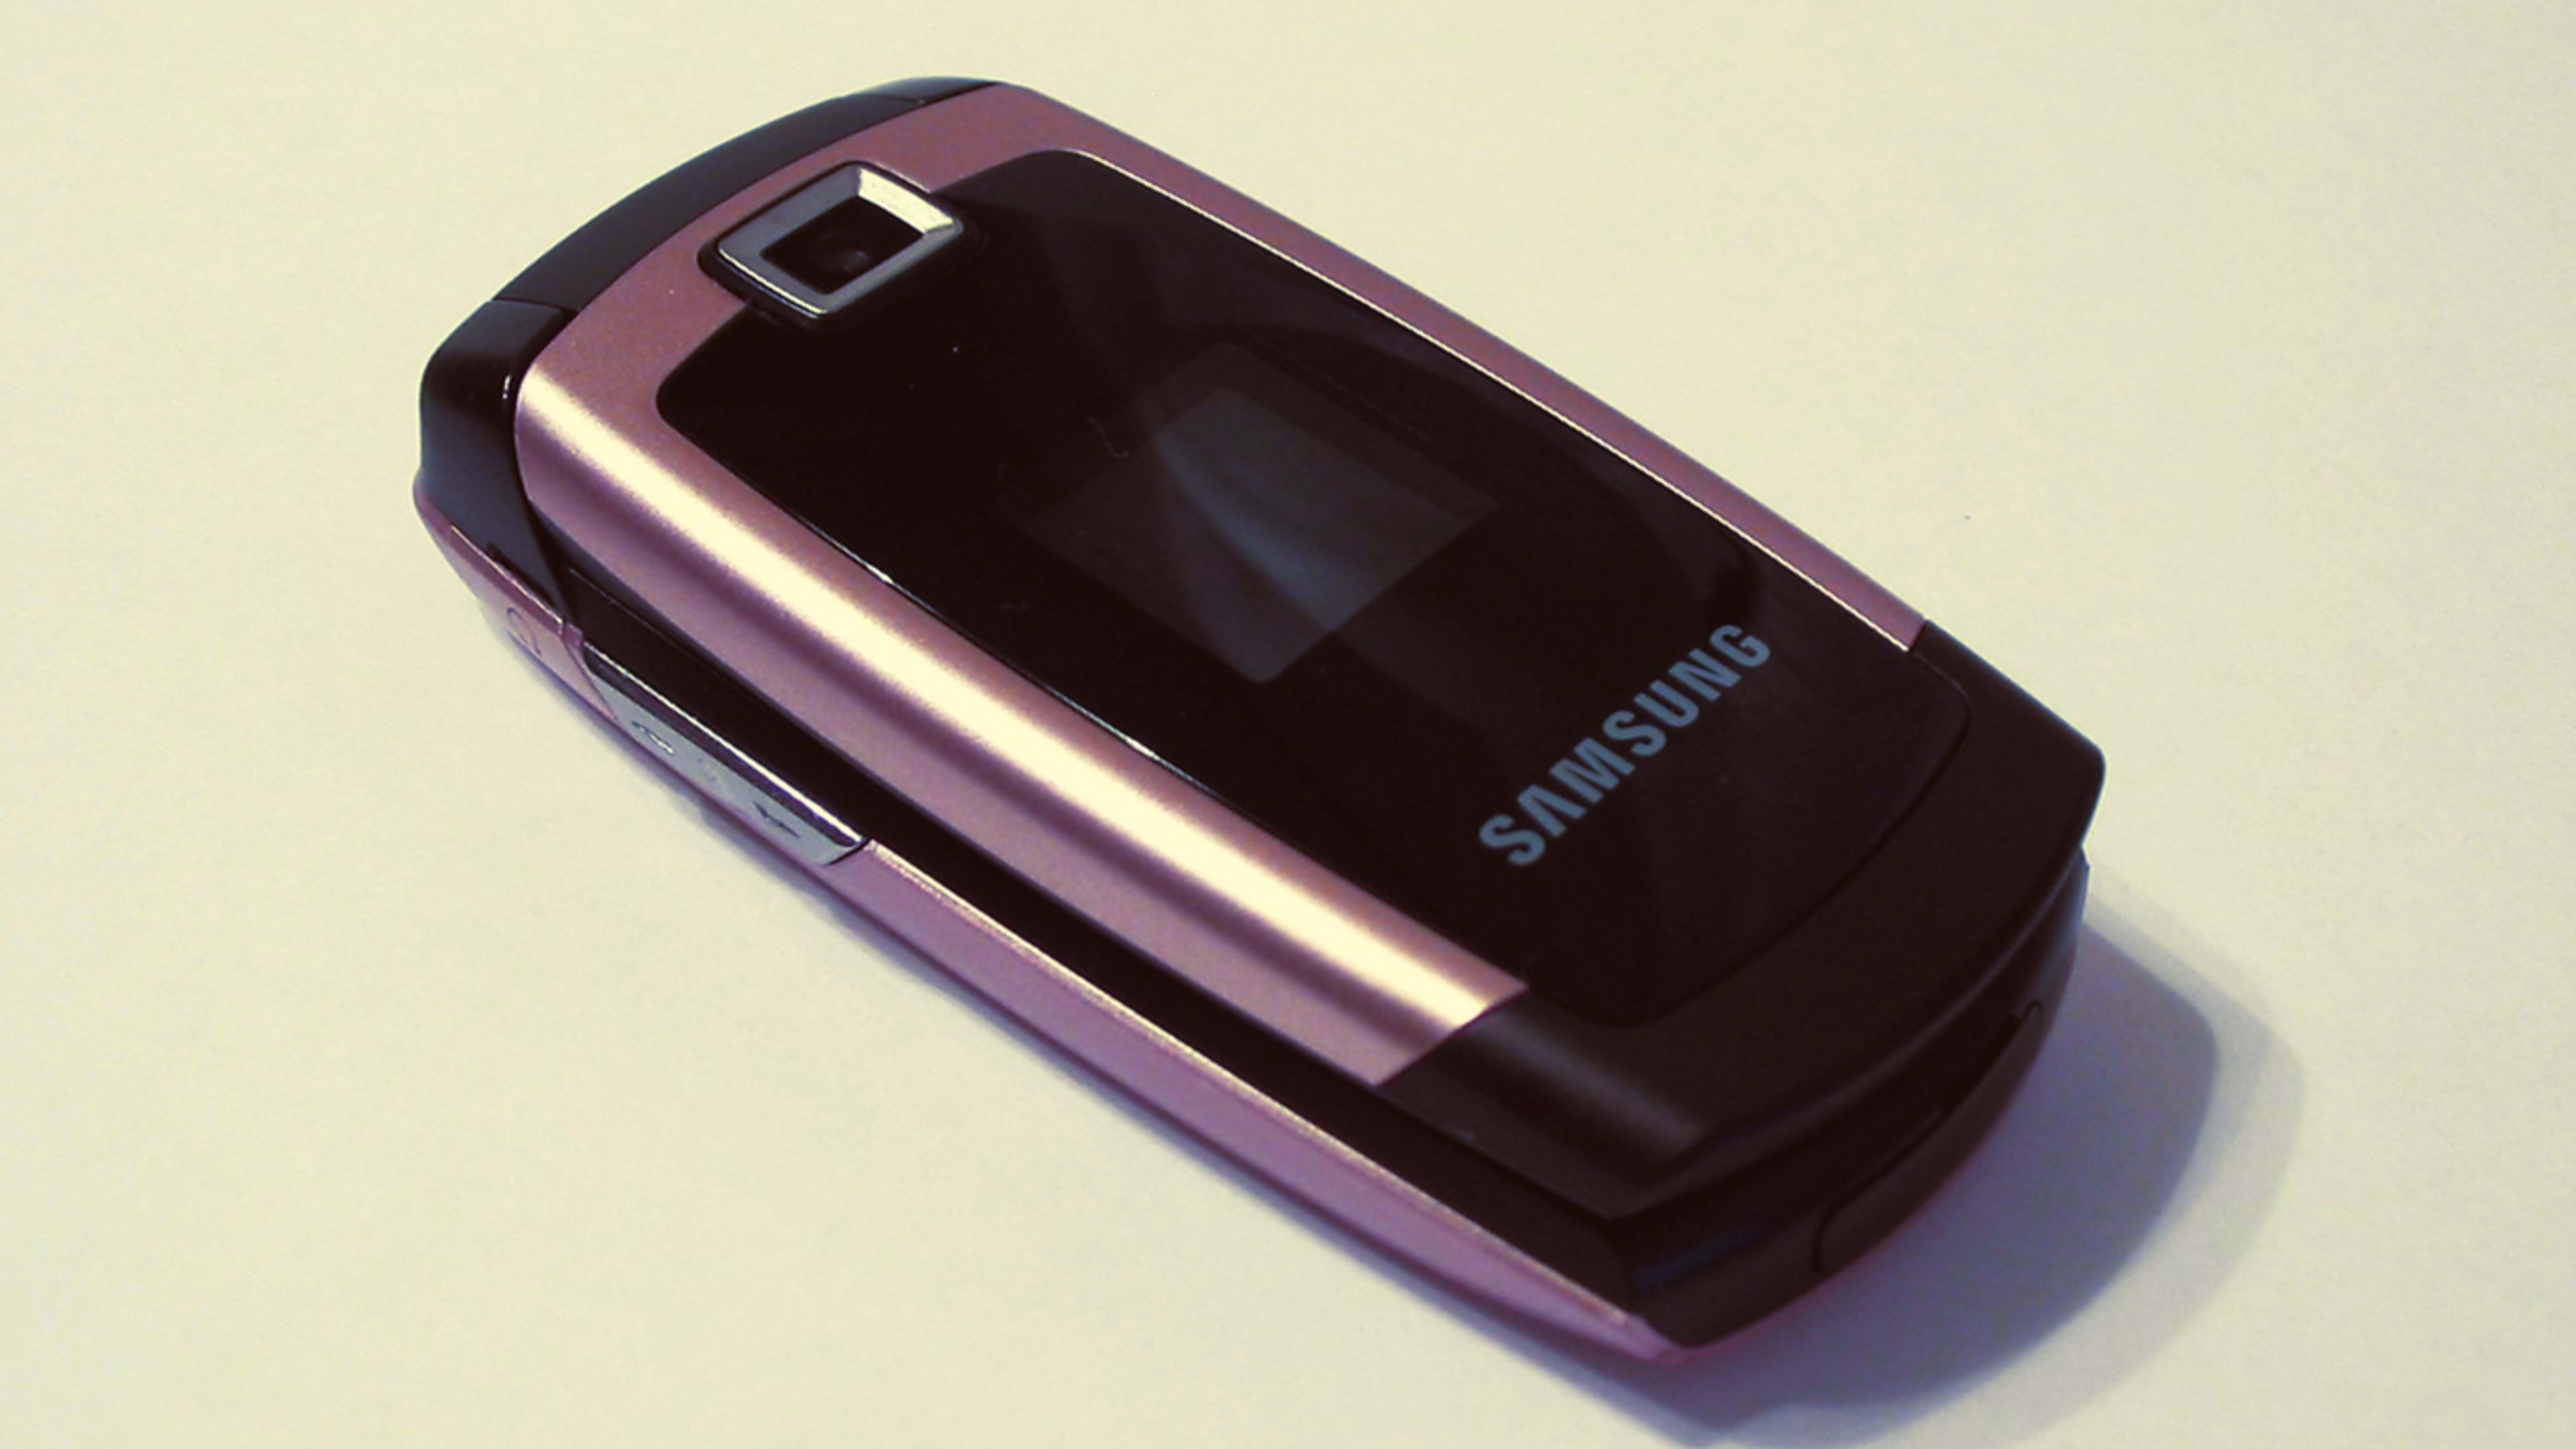 You can get $1,000 if you’ll ditch your smartphone for a flip phone for a week